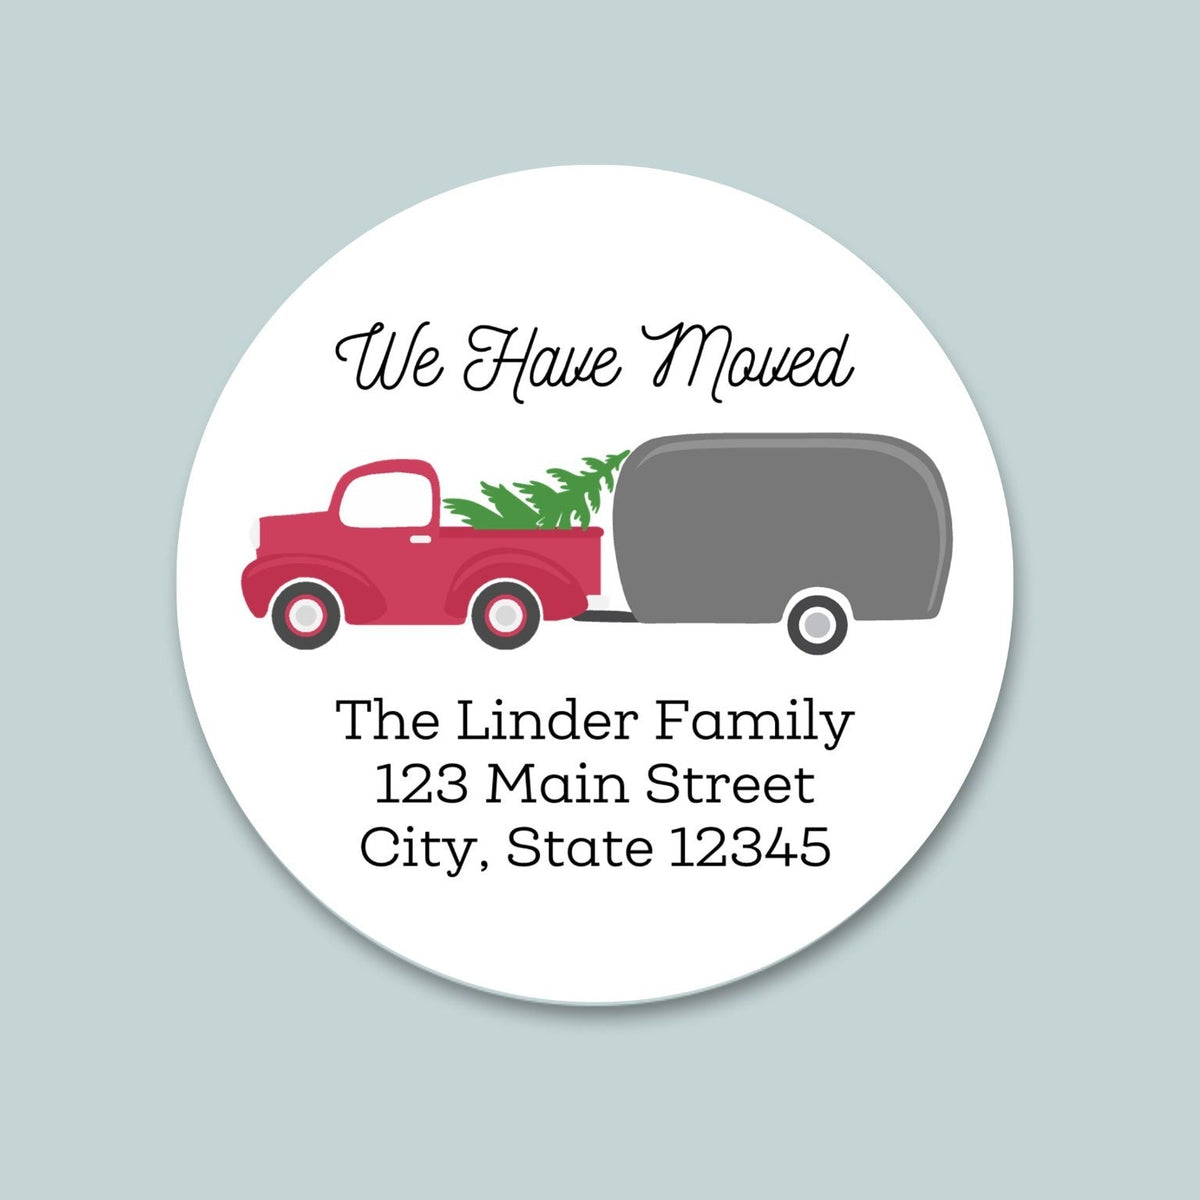 Vintage Truck and Christmas Tree - We've Moved Round Address Label - The Note House